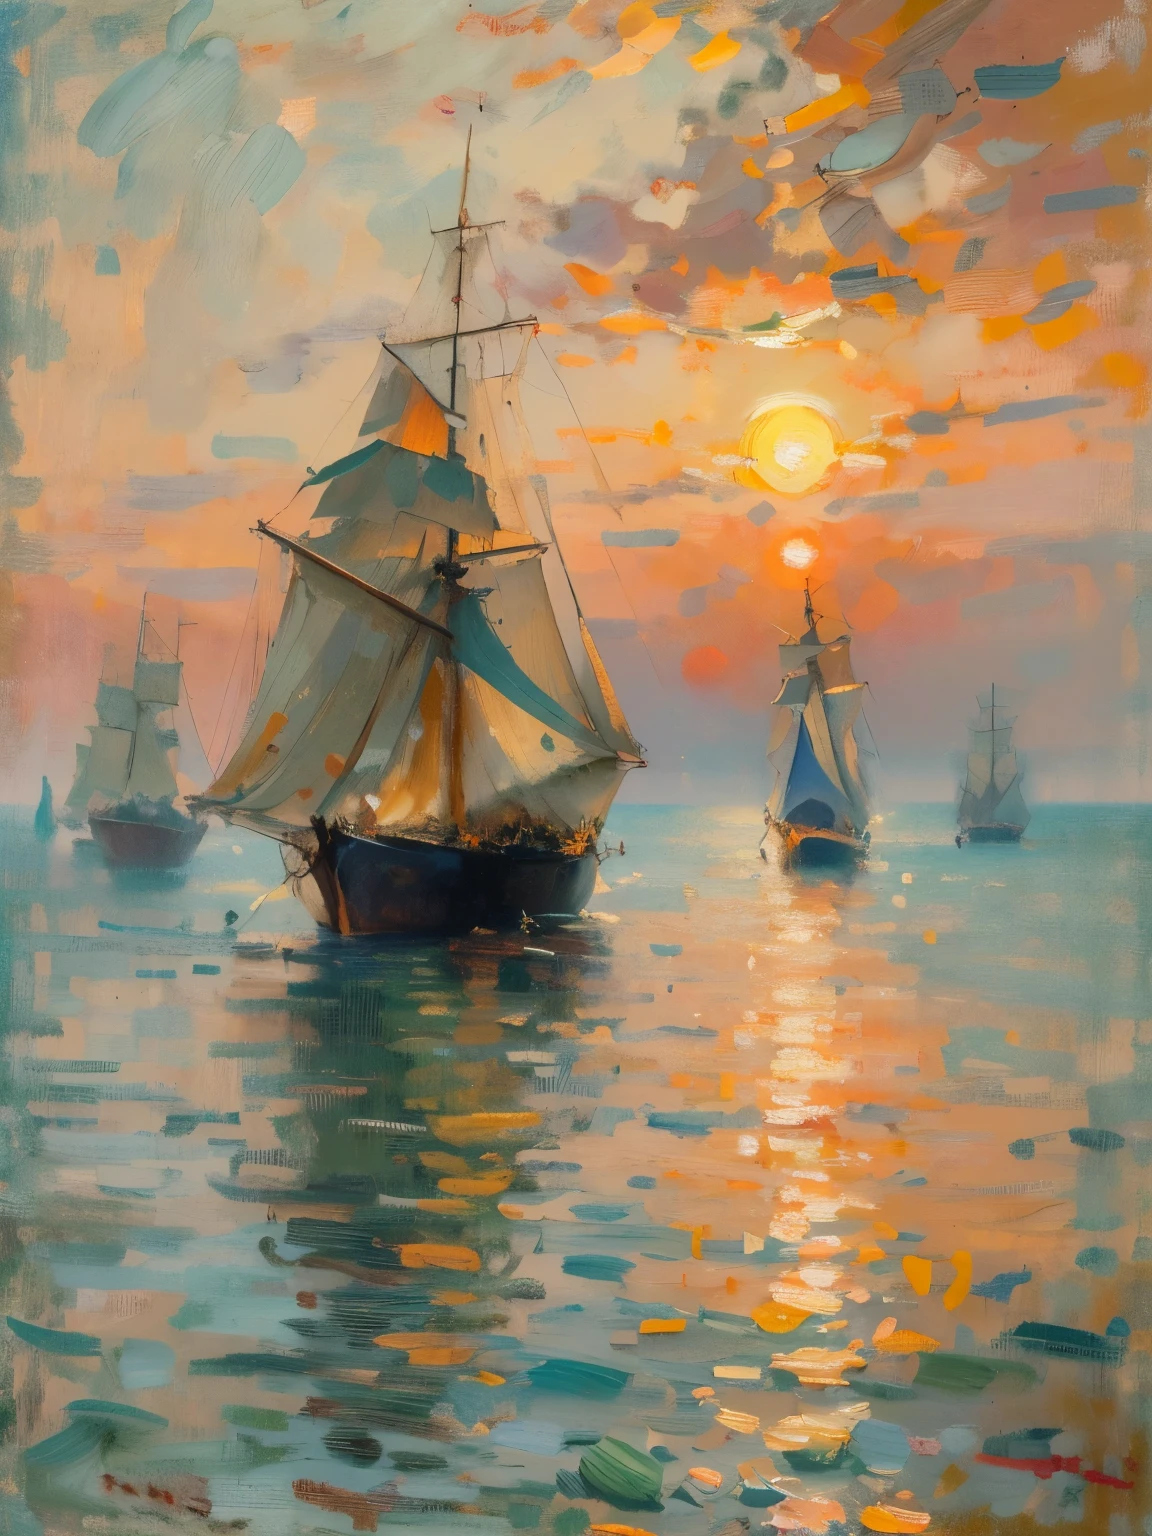 （（（masterpiece，painting）））。A painting：Impressionism art style，Claude Monet Art，sunrise，Caravel sailboat in the sea，